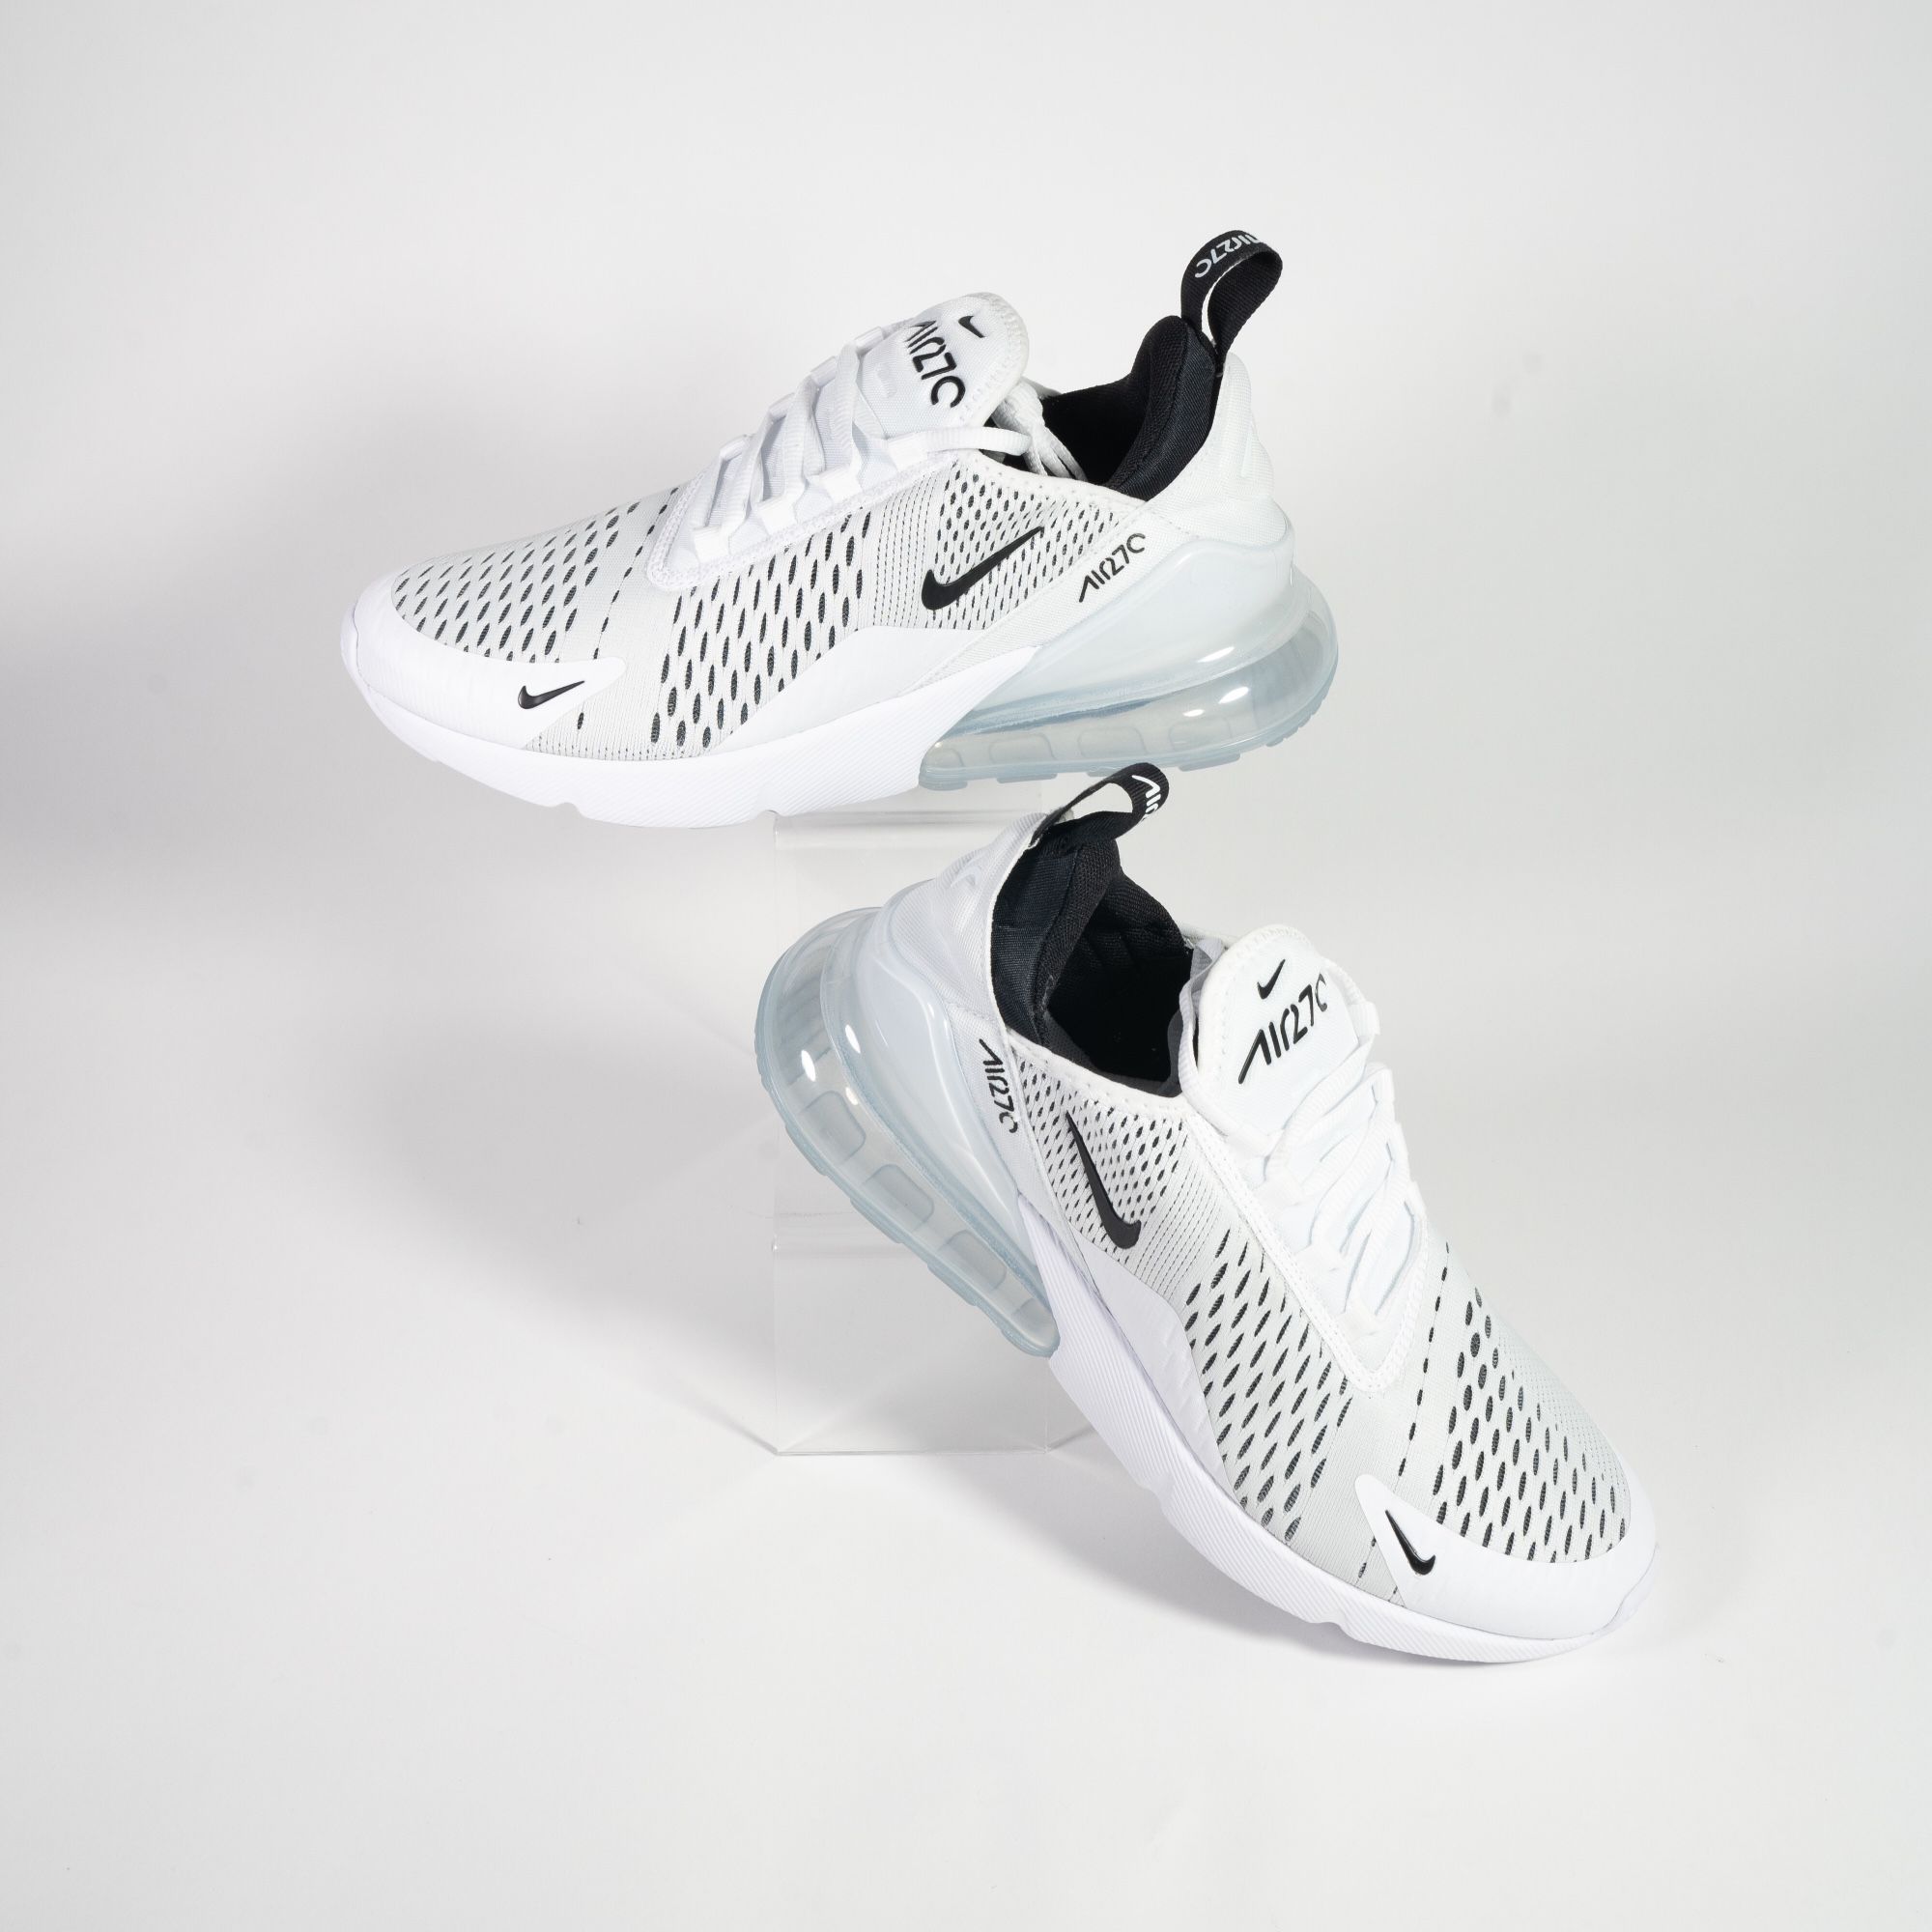 Nike Womens Air Max 270 AH6789-100 White Black Running Shoes Sneakers Size 9